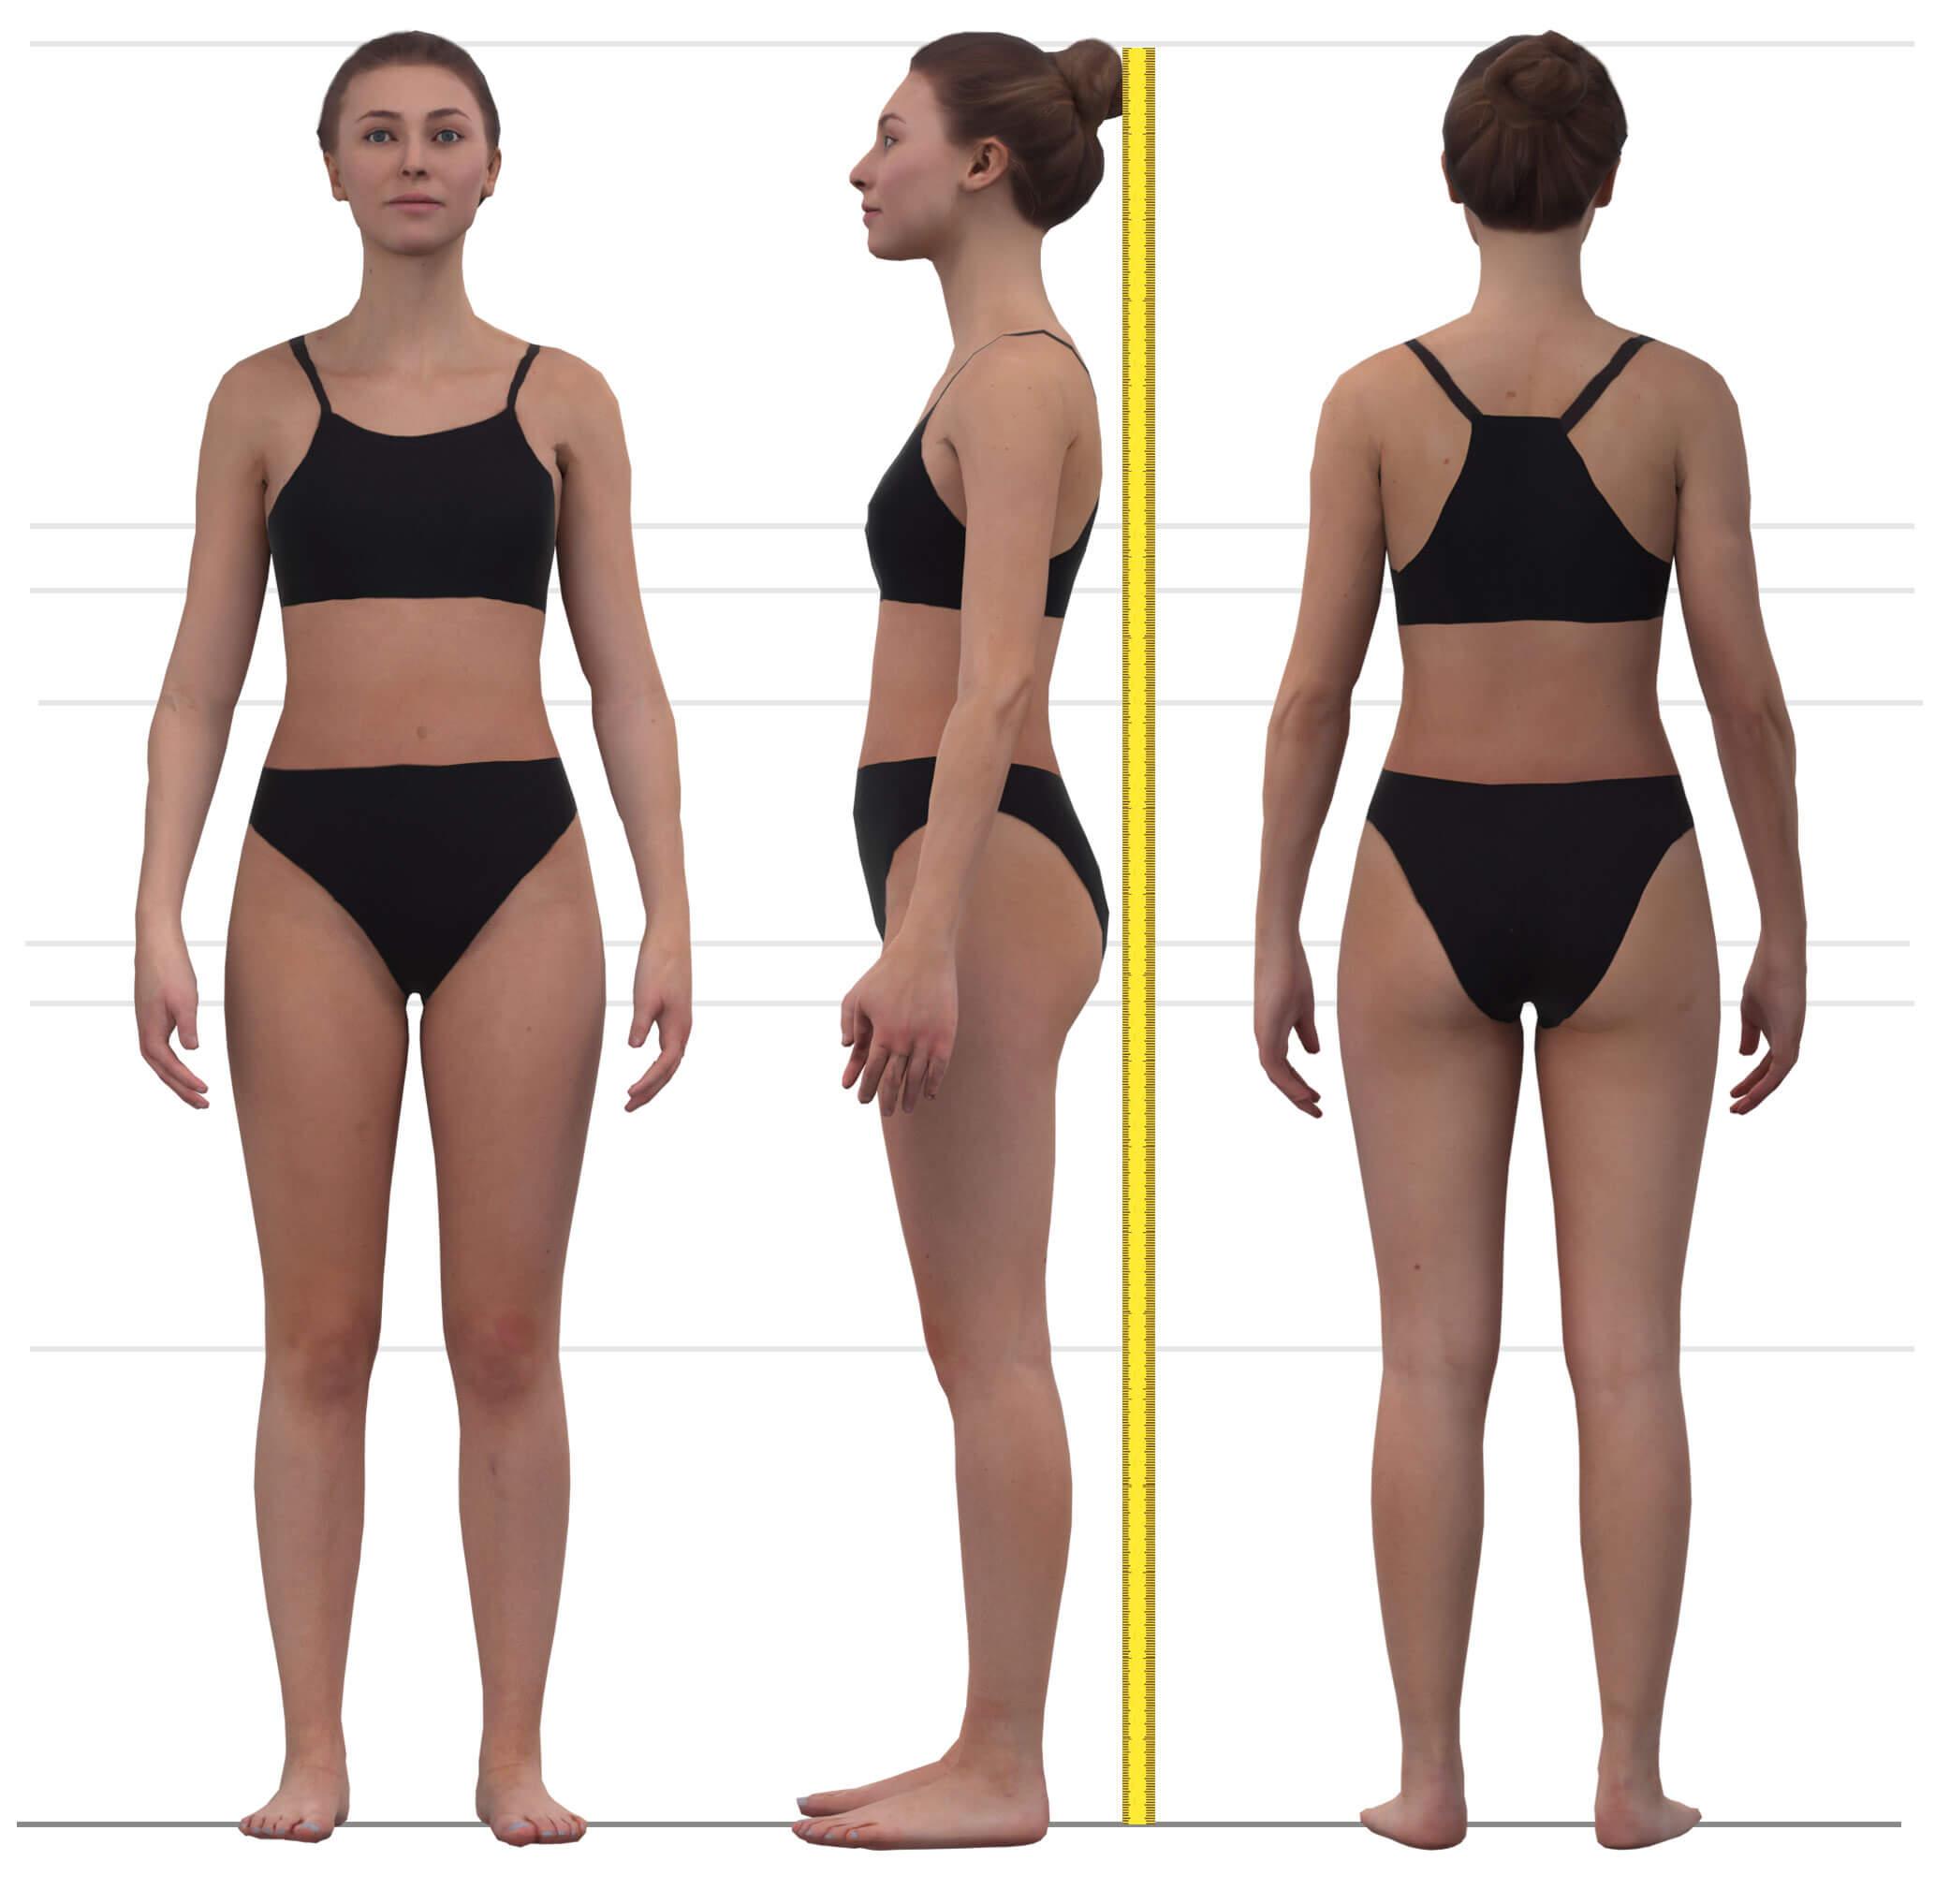 The picture shows how the body height is measured.